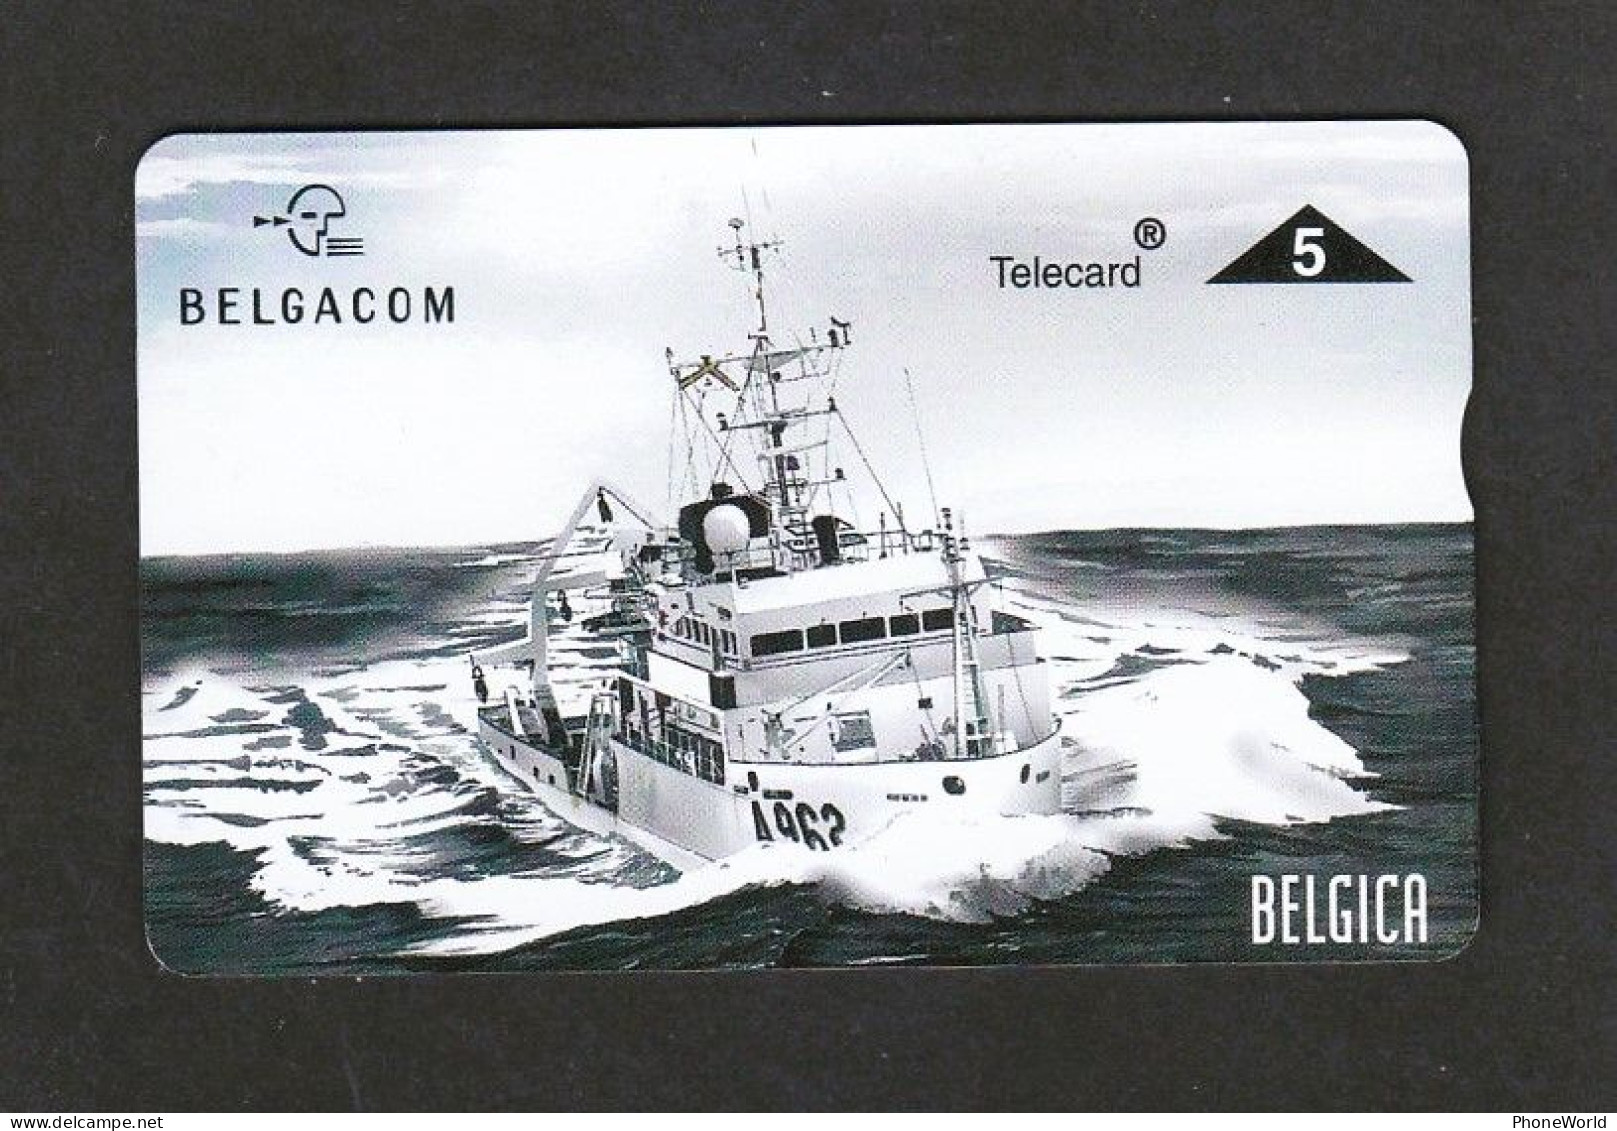 P551 - Belgica 2 - 706 L Mint - Ship - Army - Sin Chip